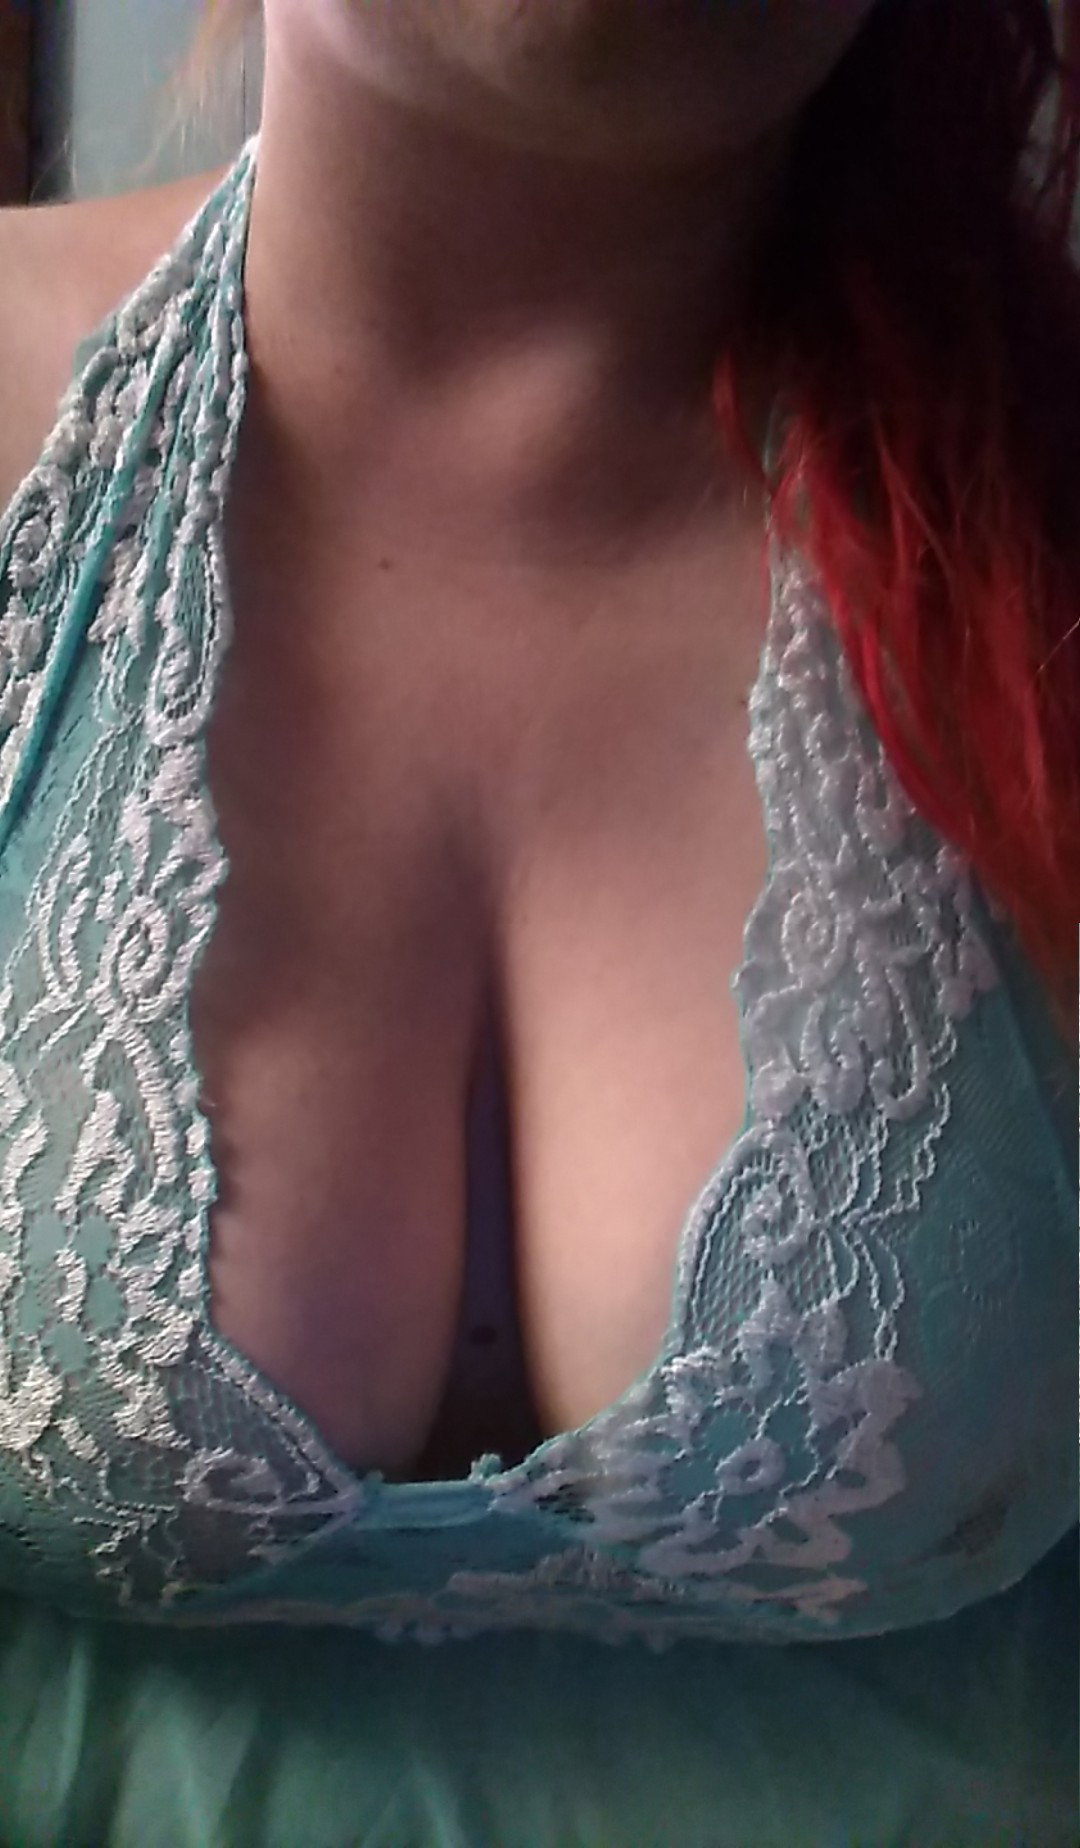 Watch the Photo by Goddess_B with the username @worshipme4life, who is a verified user, posted on December 9, 2019 and the text says 'Worship my beautiful breasts while you stroke and send my pets!'